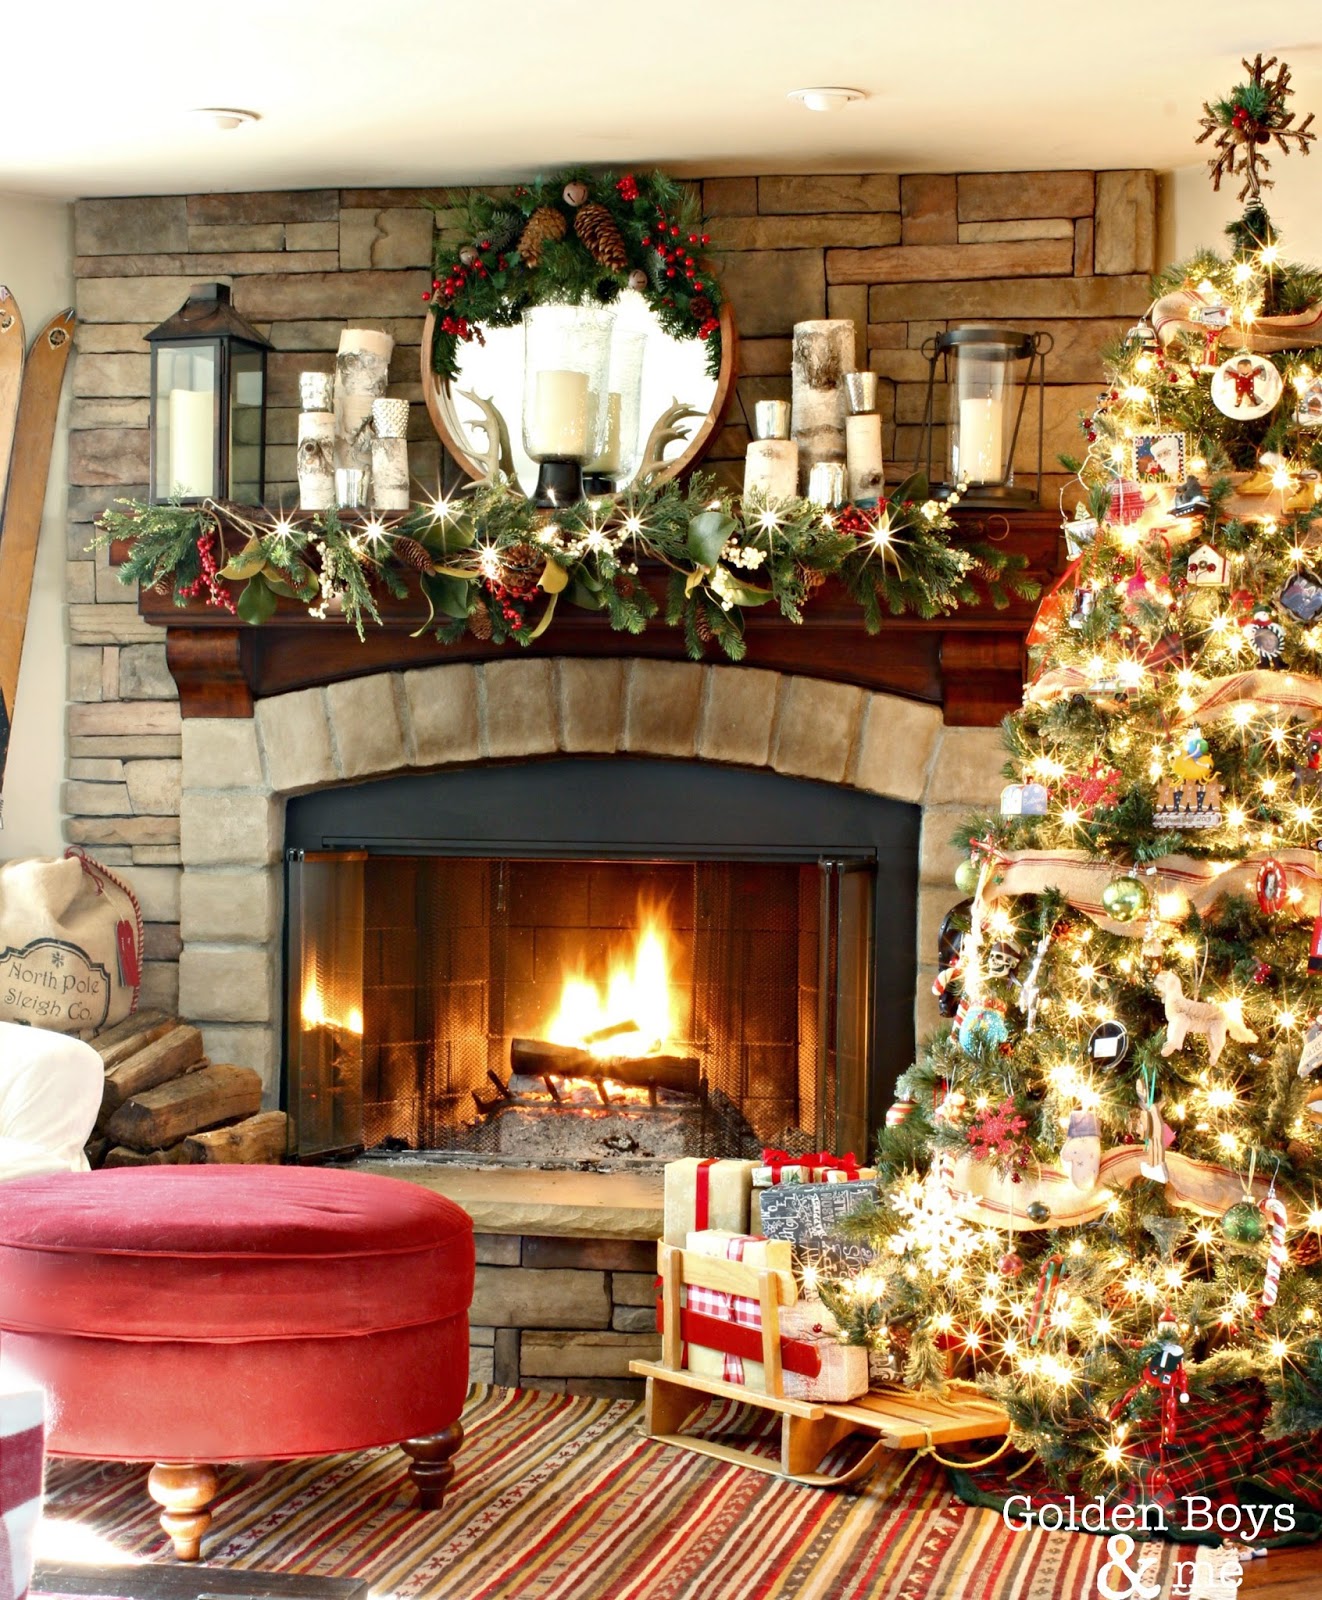 Rustic lodge style family room at Christmas with corner stone fireplace and vintage wood skis-www.goldenboysandme.com